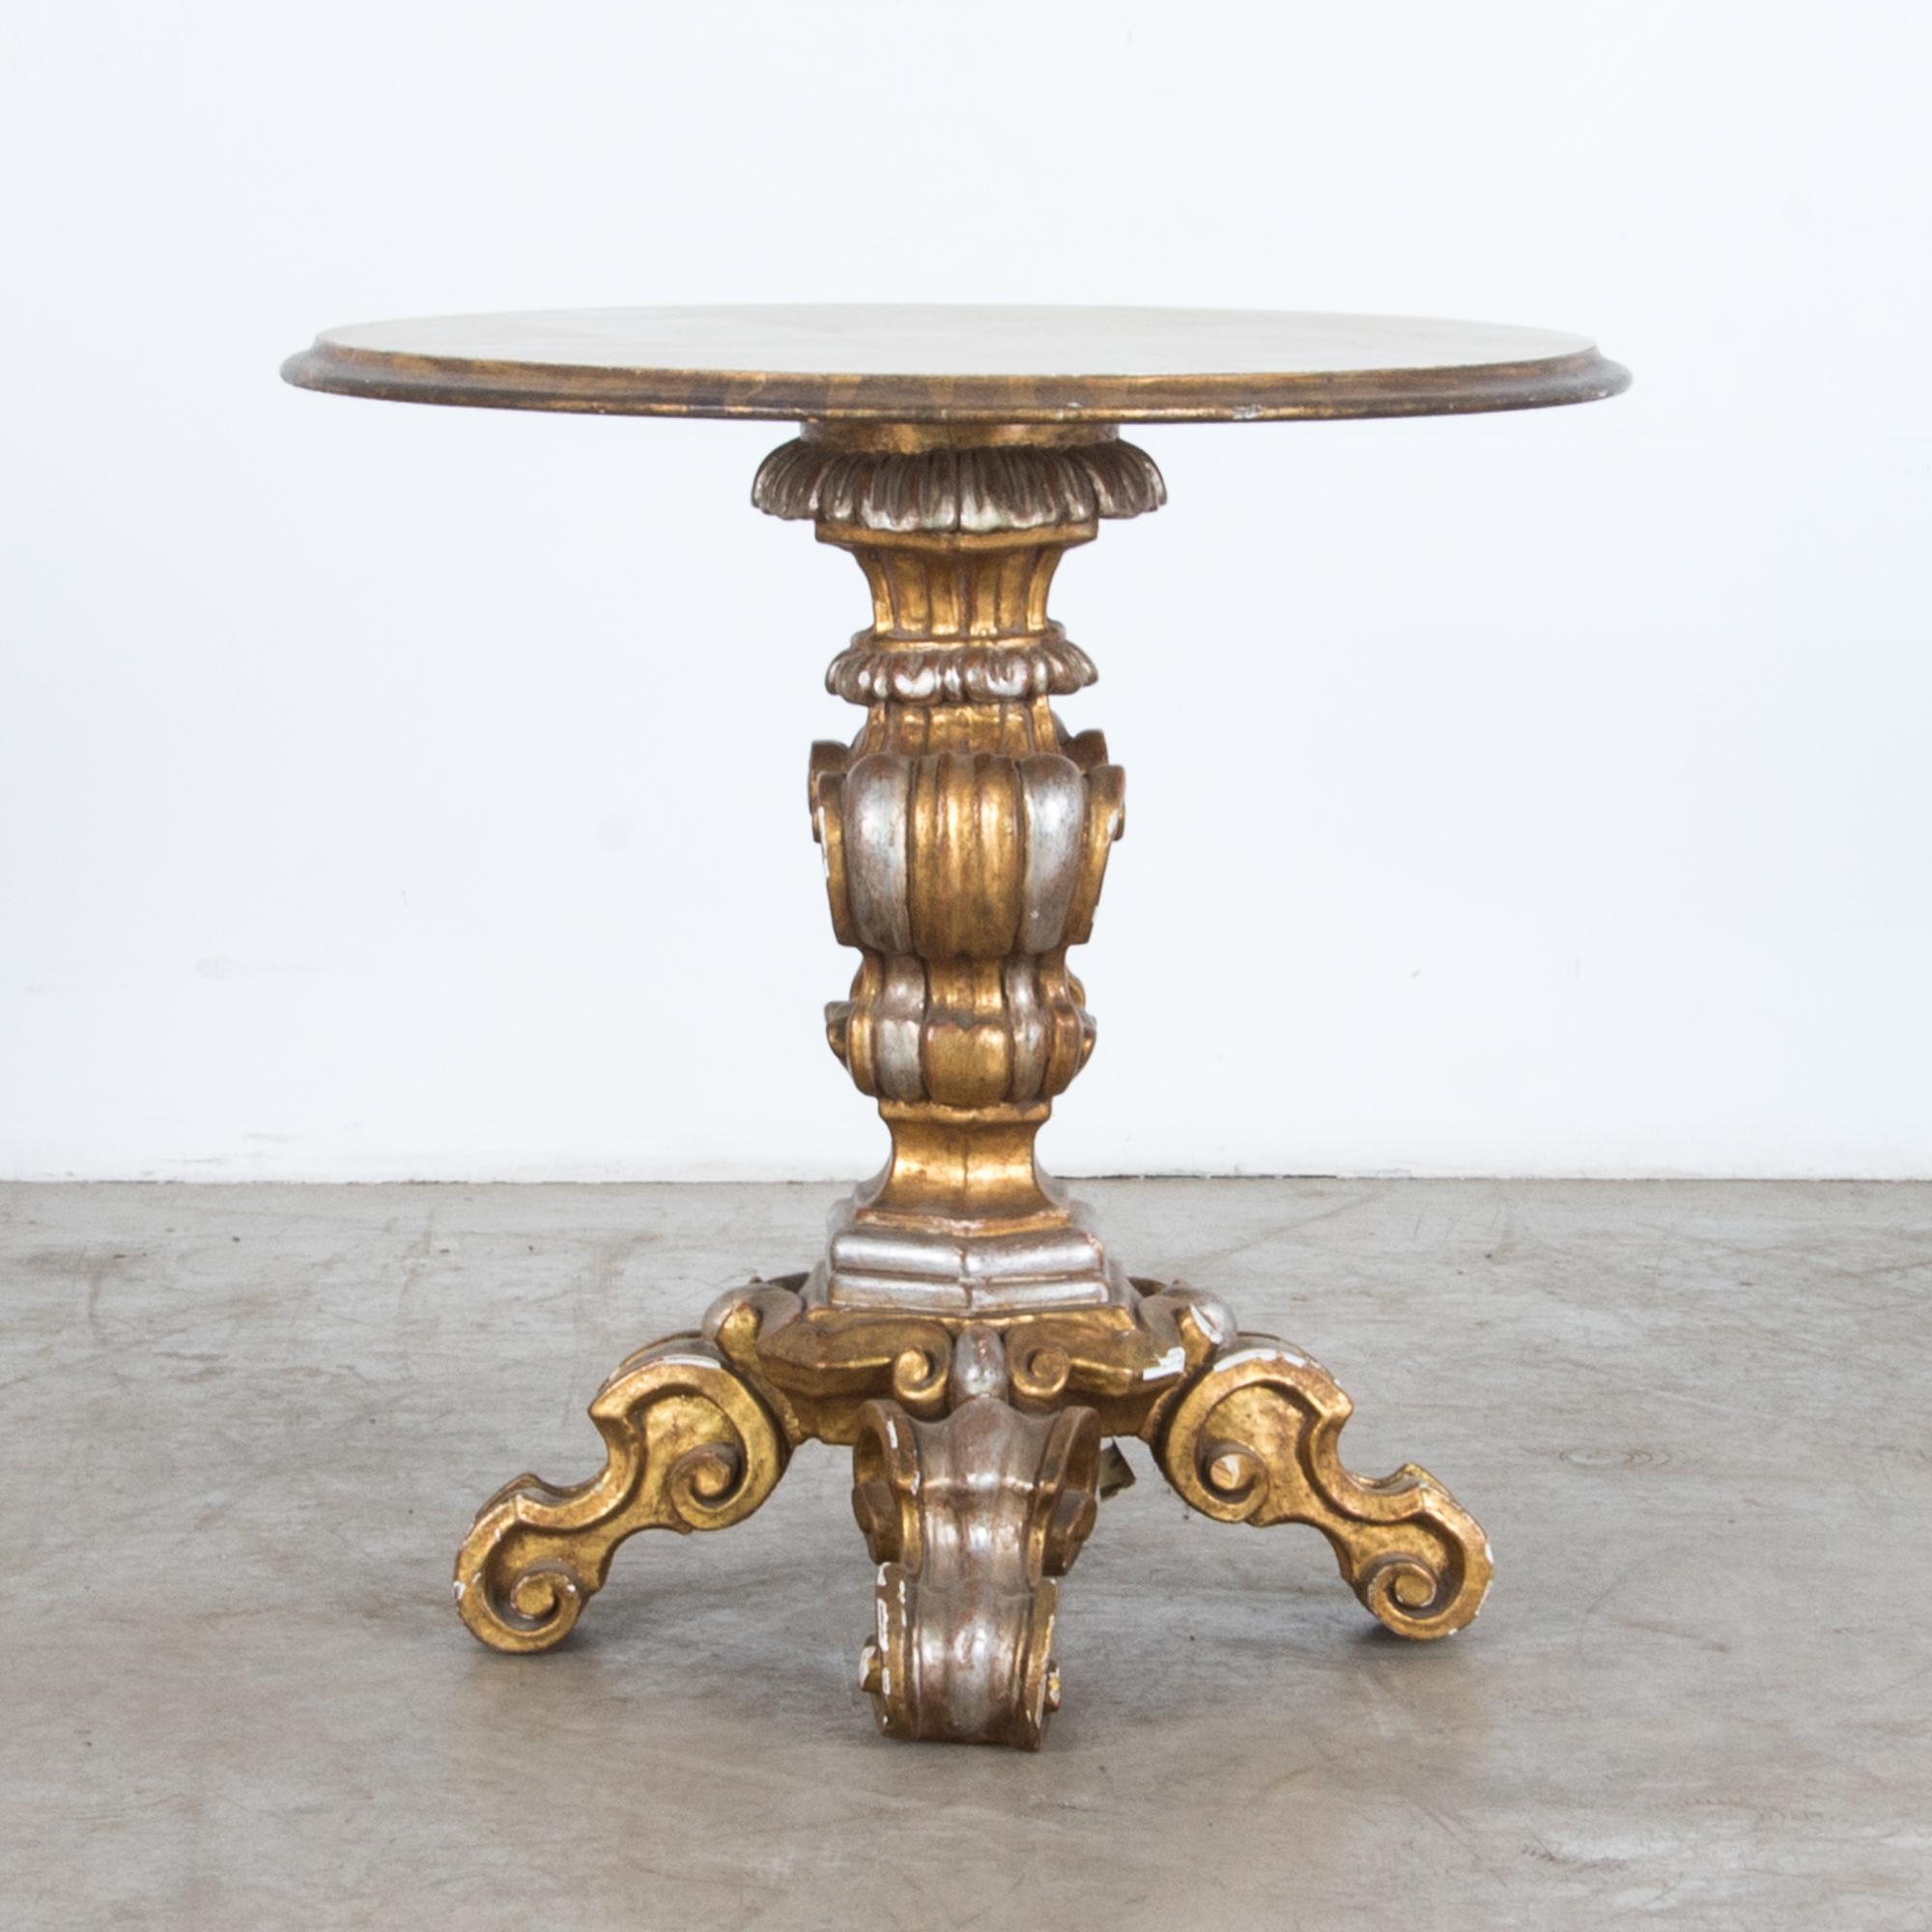 A Baroque inflected wood carved table from Italy, circa 1950. Brightly painted in metallic hues, this piece is an eclectic vintage interpretation of Rococo fashion. Executed with traditional techniques, hardwood is elaborately carved into scrolling